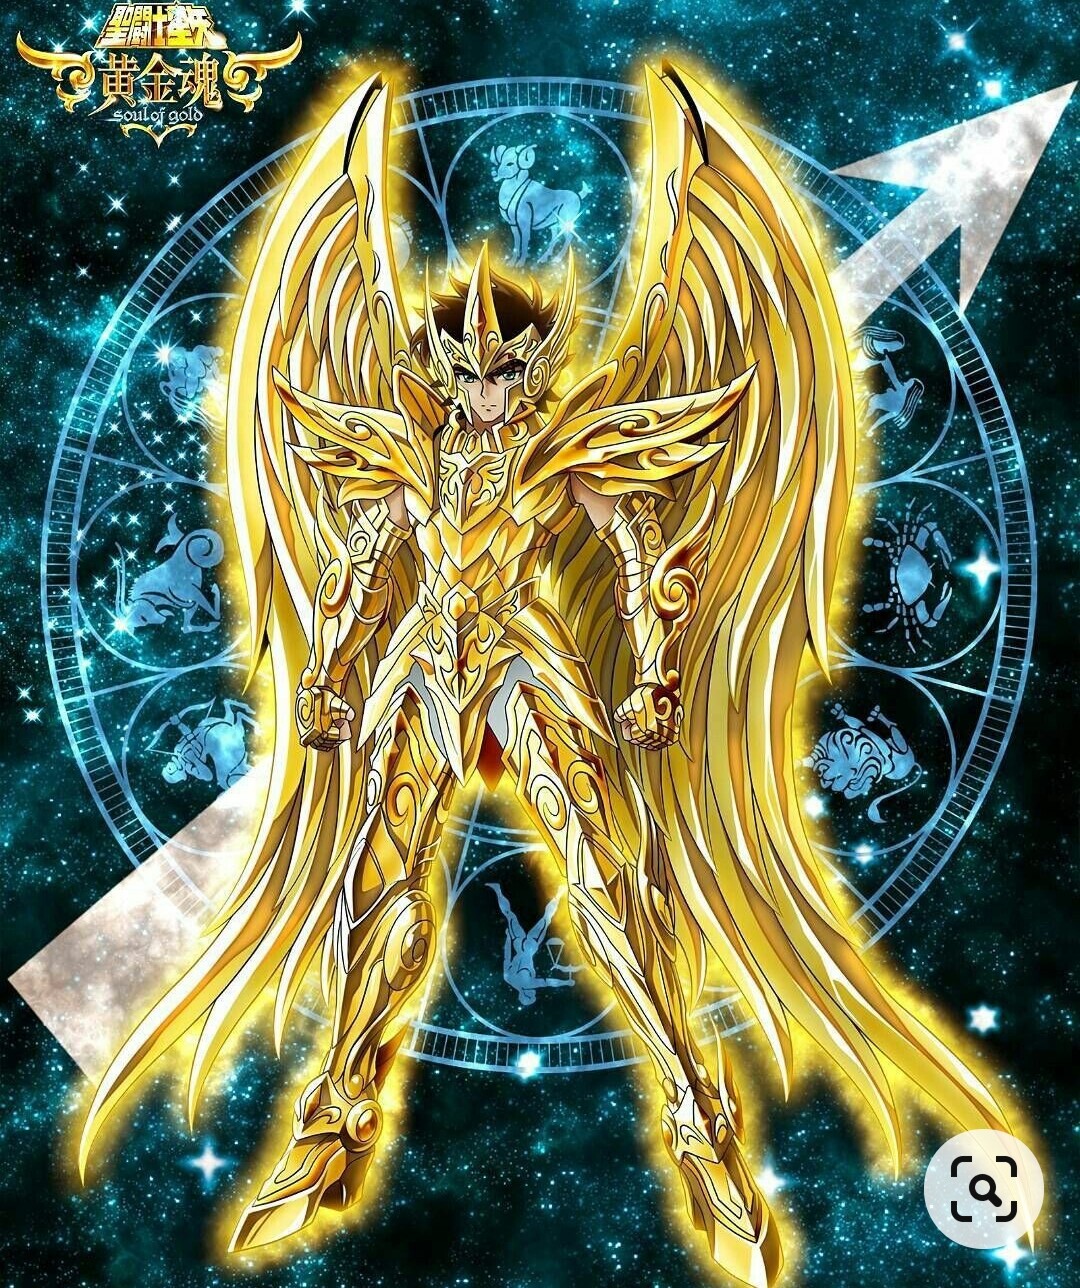 SoG / Utgard / Soul of Gold / Credits to the owner  Cavaleiros do zodiaco  anime, Cavaleiros do zodiaco, Saint seiya